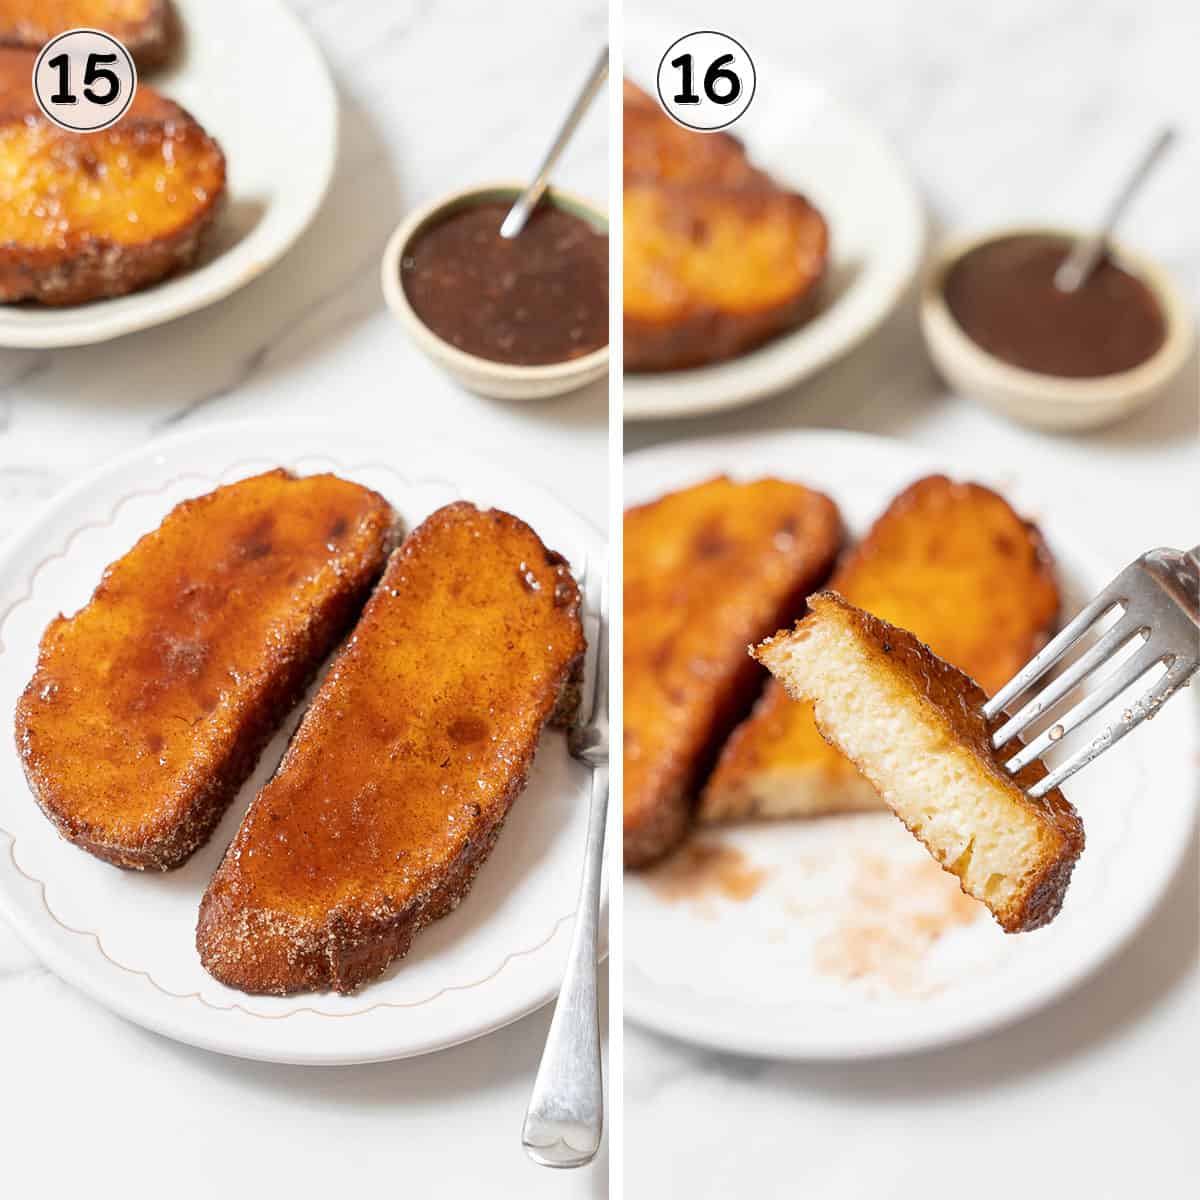 torrijas soaked in syrup and eating a bite with a fork.